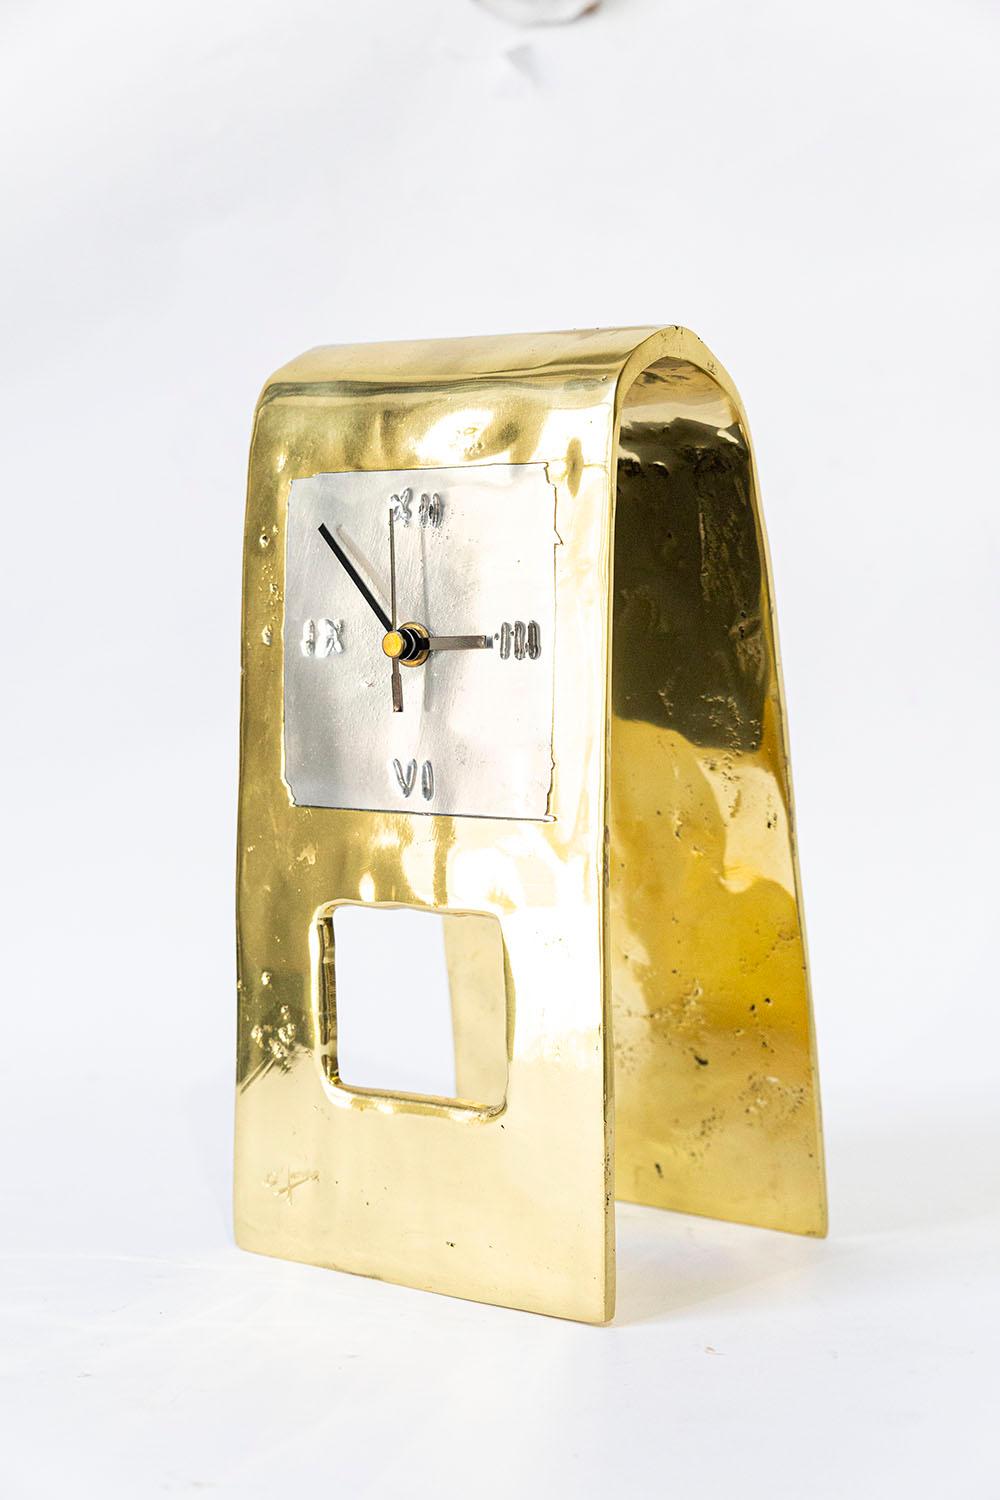 The decorative Desk Clock was created by David Marshall, it is made of sand cast aluminum and sand cast brass.
Handmade, mounted and finished in our foundry and workshop in Spain from recycled materials.
Certified authentic by the Artist David